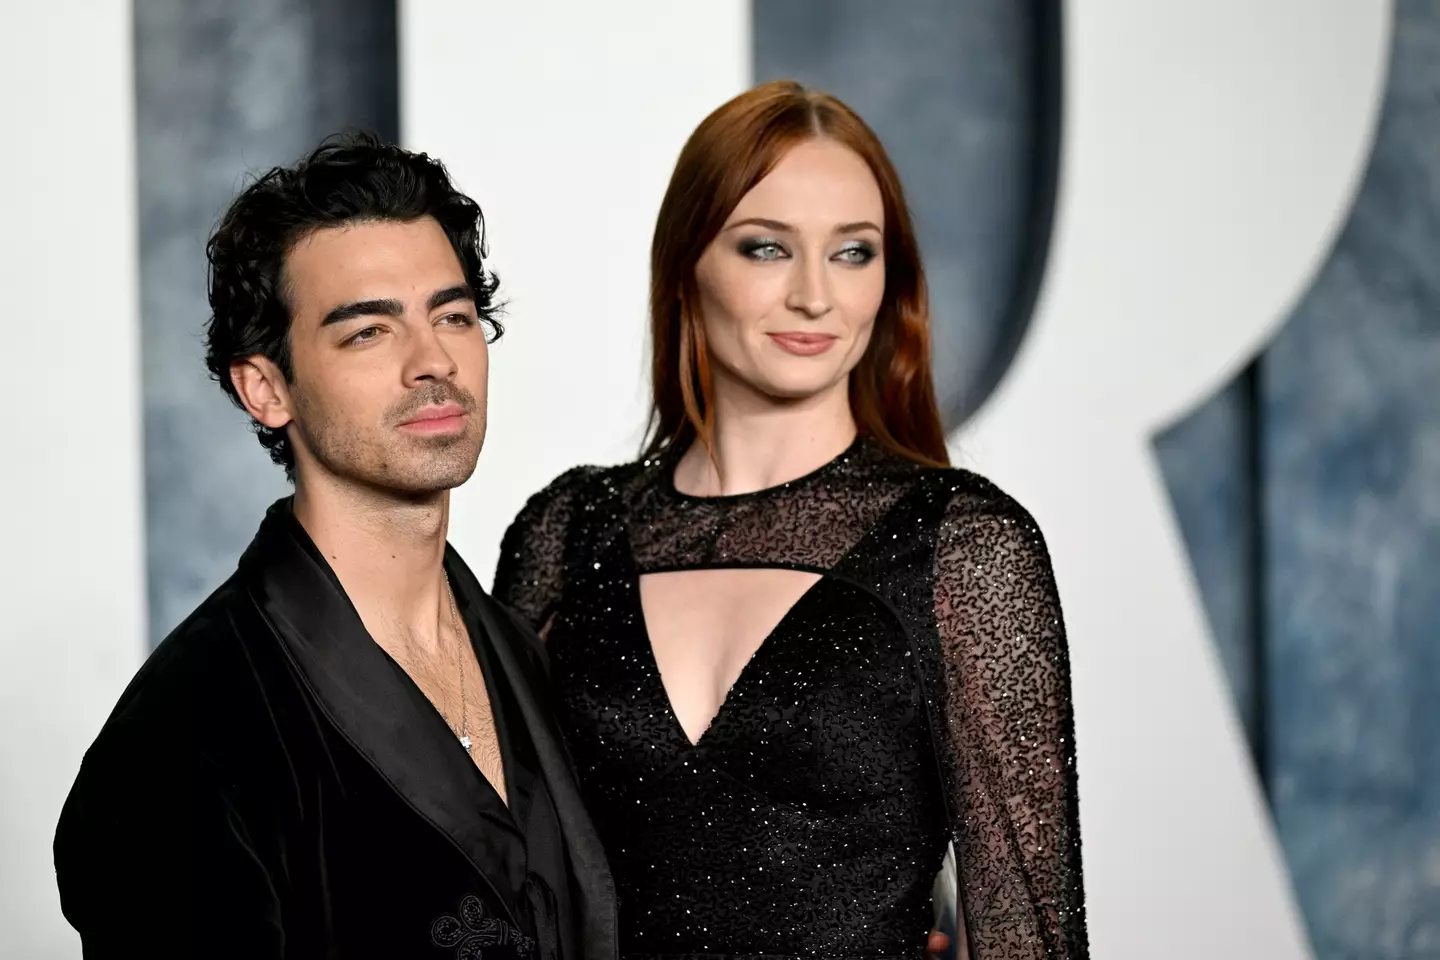 Joe Jonas and Sophie Turner are currently in a custody battle.